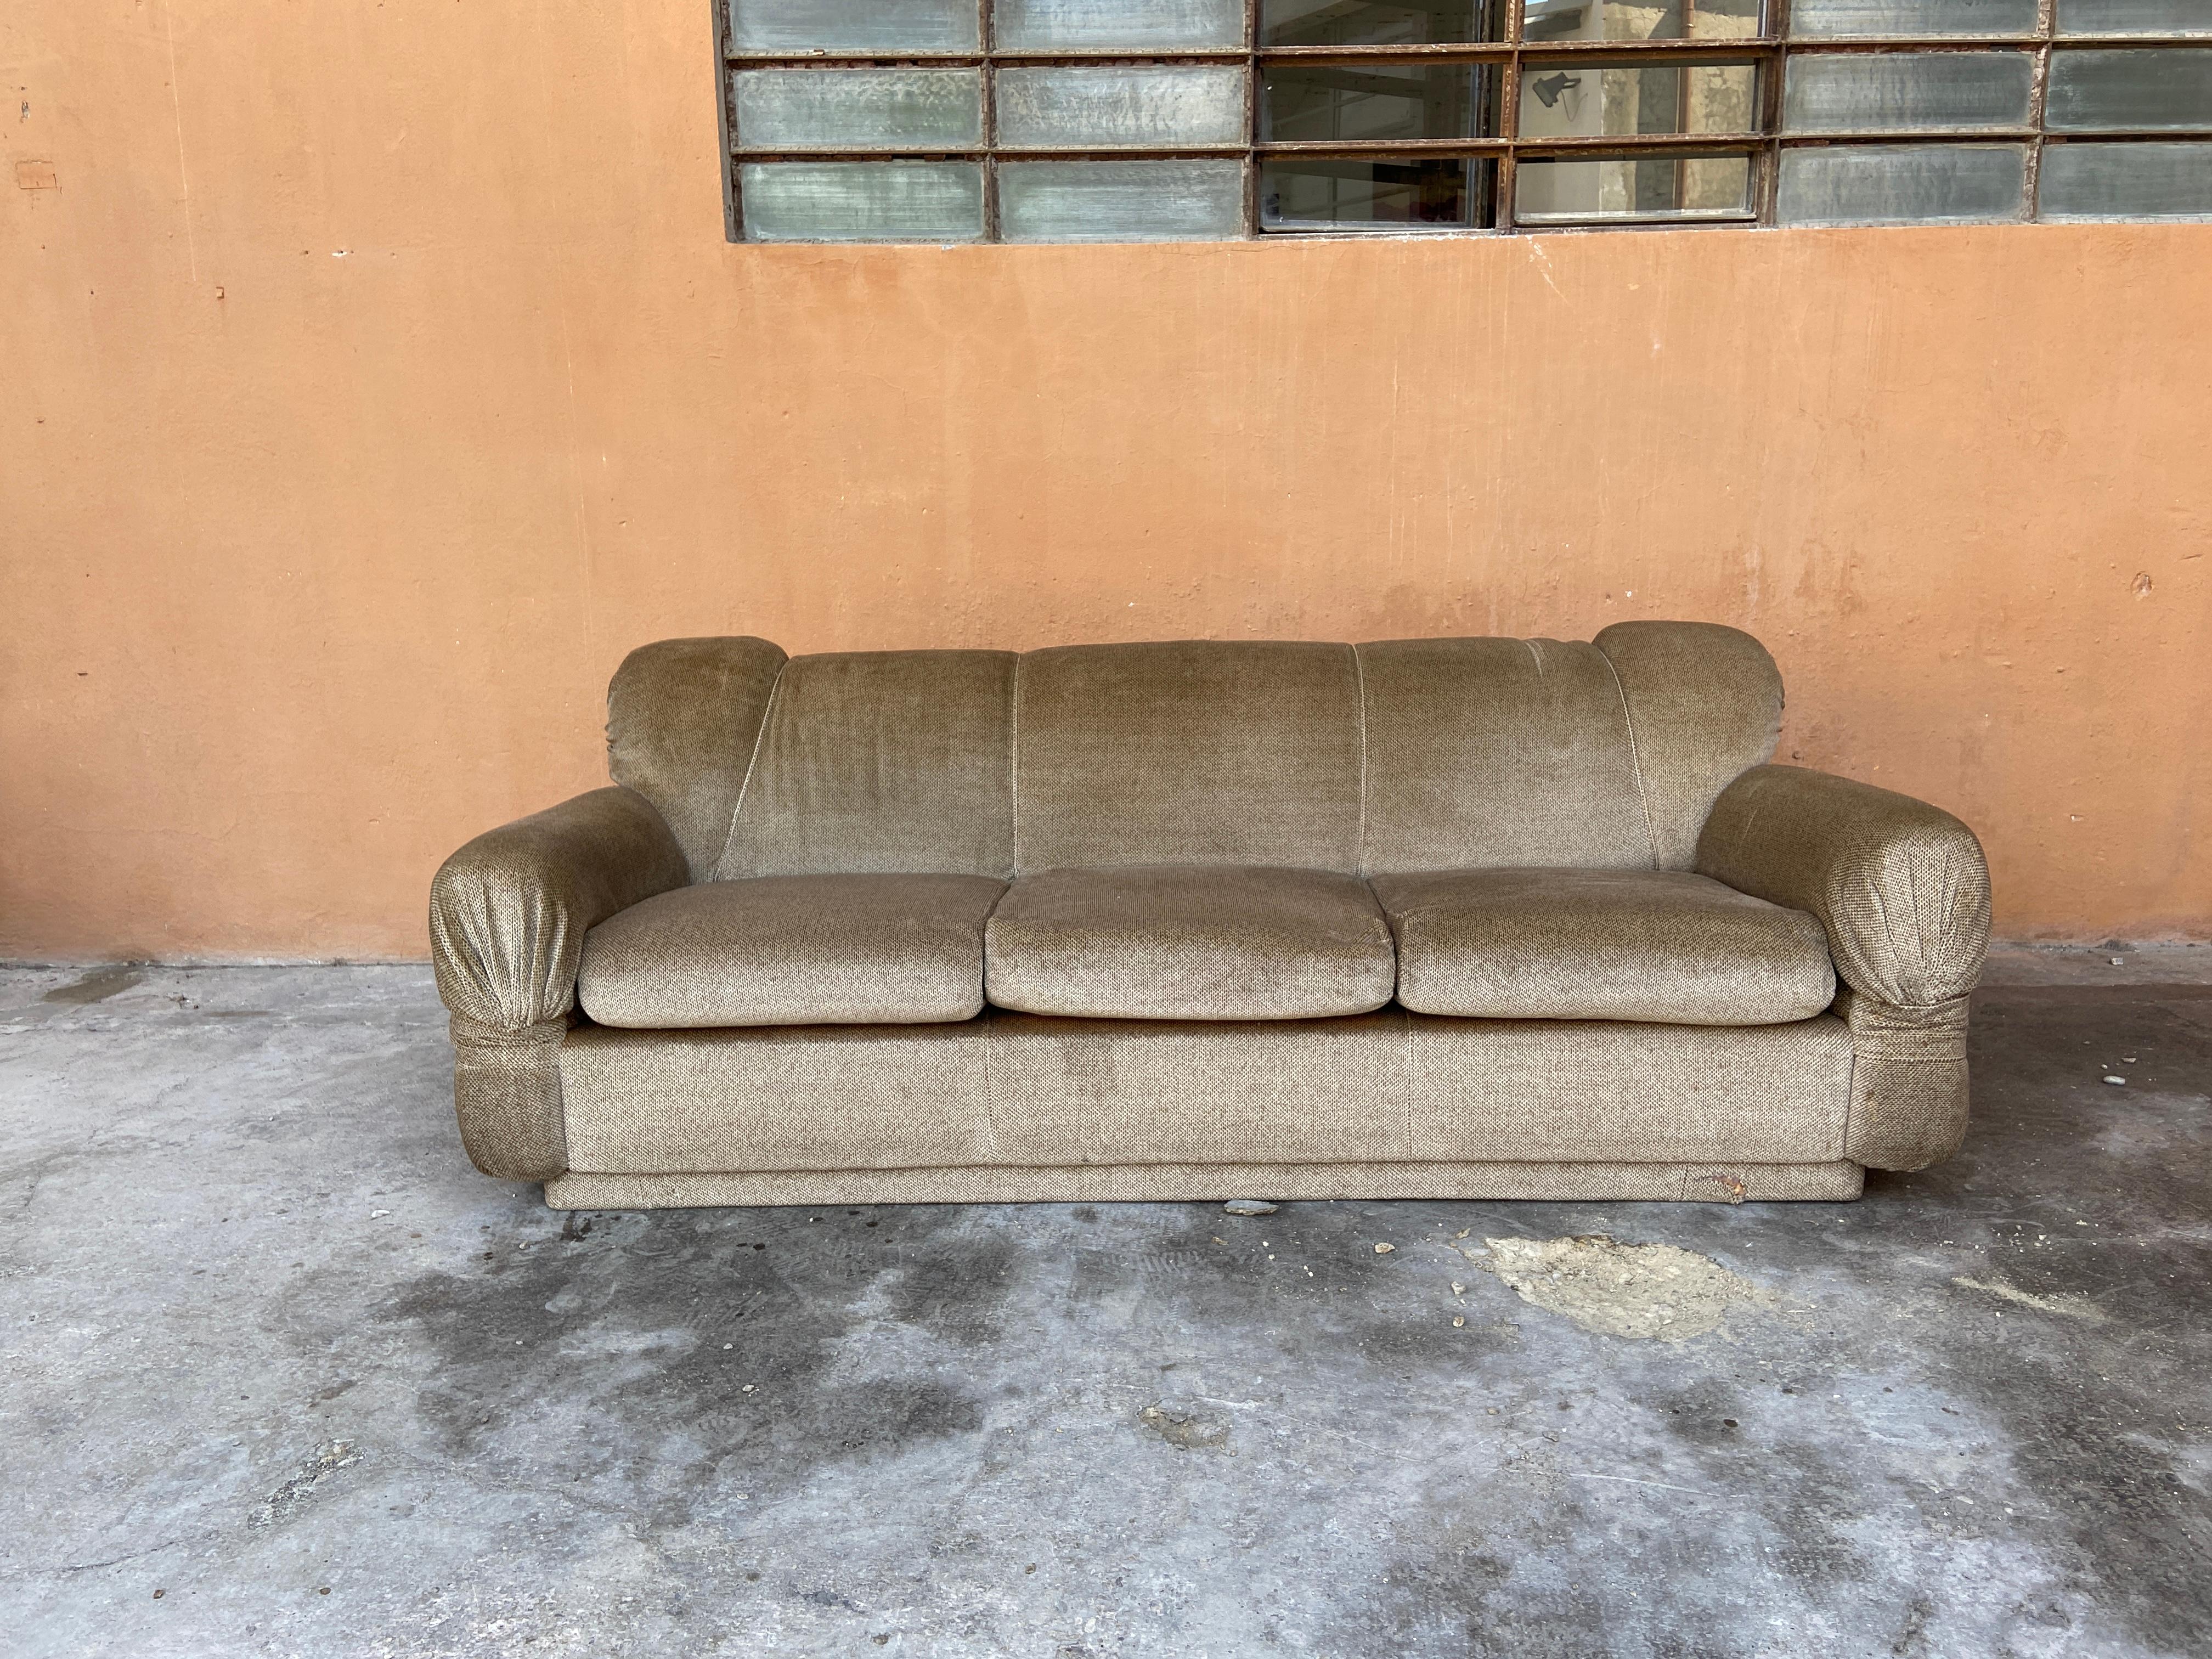 Mid-Century Modern Italian sofa with chrome back details and original velvet upholstery.
Overall the sofa is in good vintage condition.
 